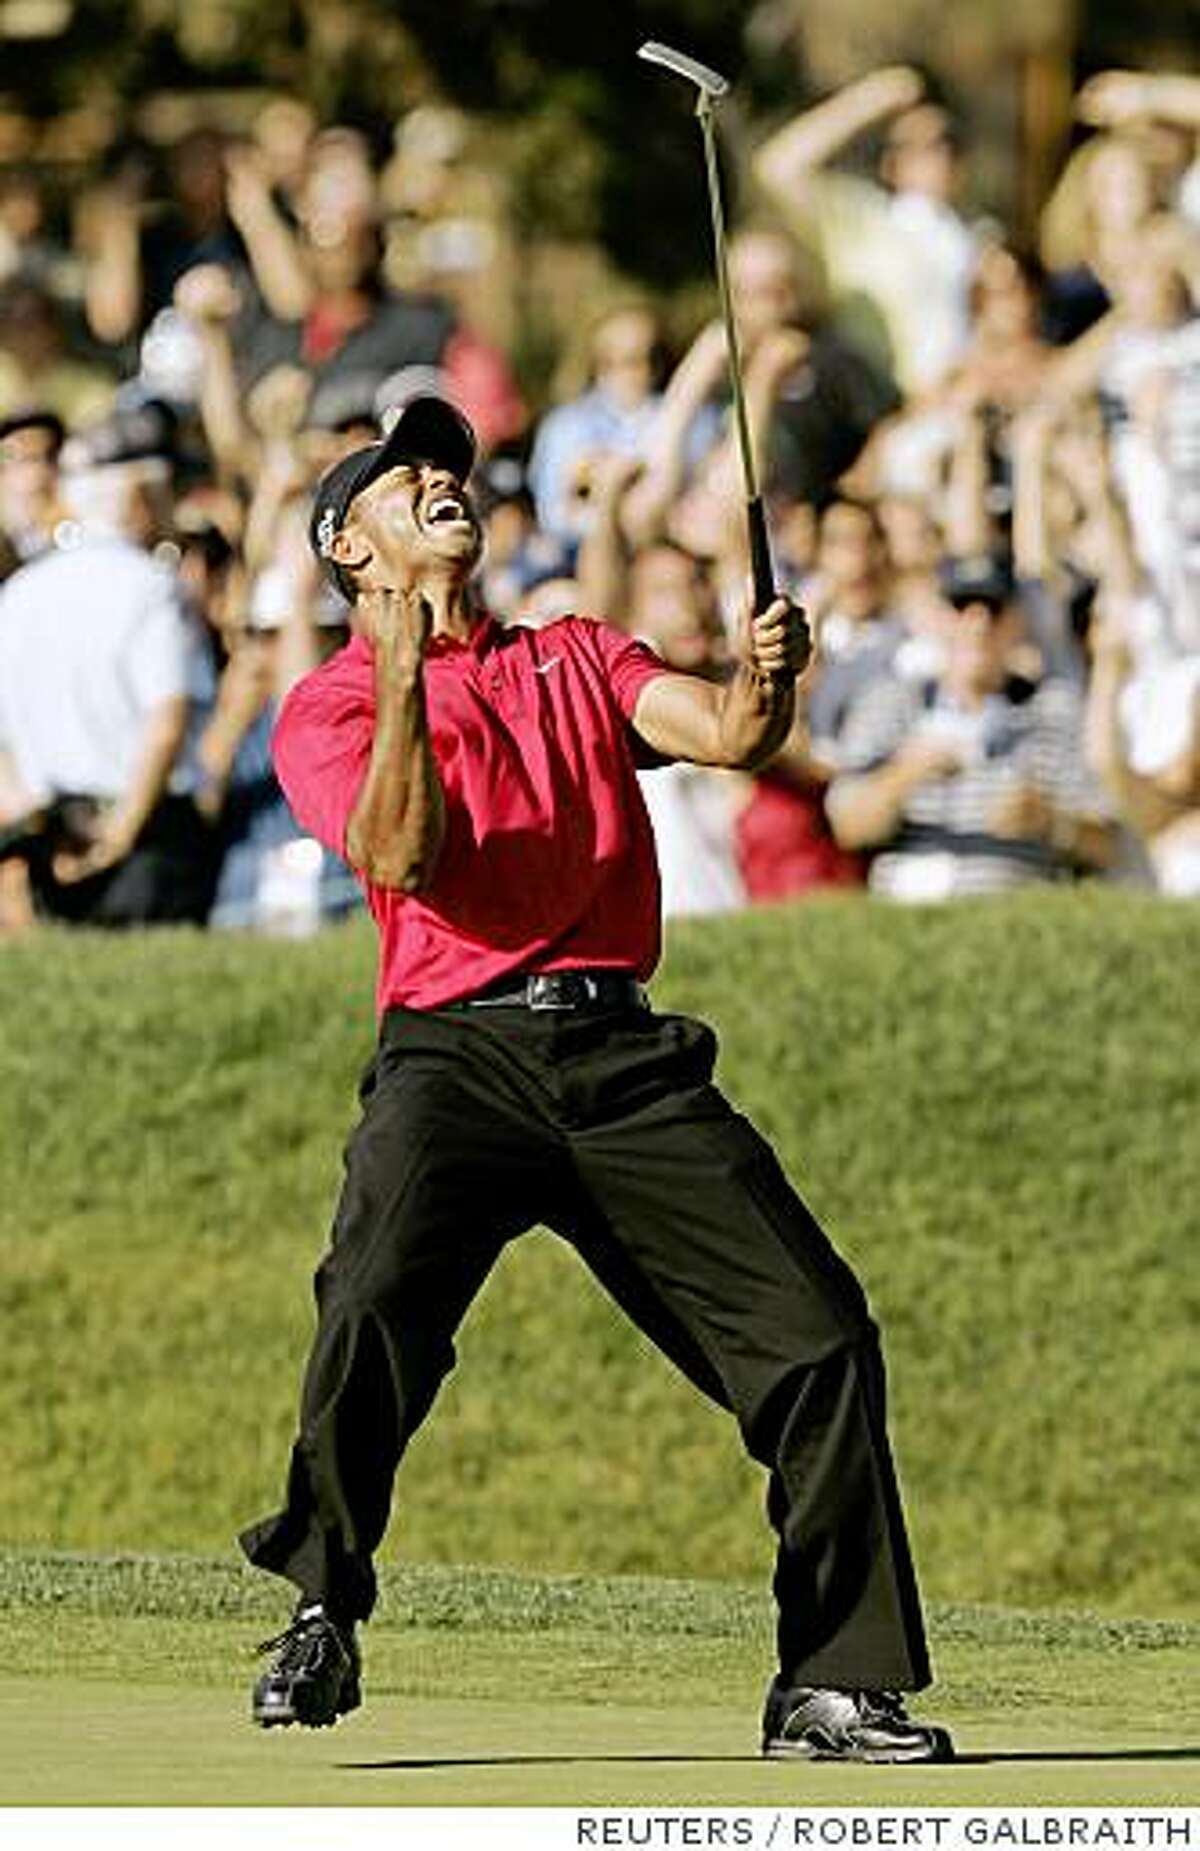 Tiger Woods celebrates sinking a birdie putt on the 18th hole to force a playoff with Rocco Mediate during the fourth round of the U.S. Open golf championship at Torrey Pines in San Diego June 15, 2008. REUTERS/Robert Galbraith (UNITED STATES)